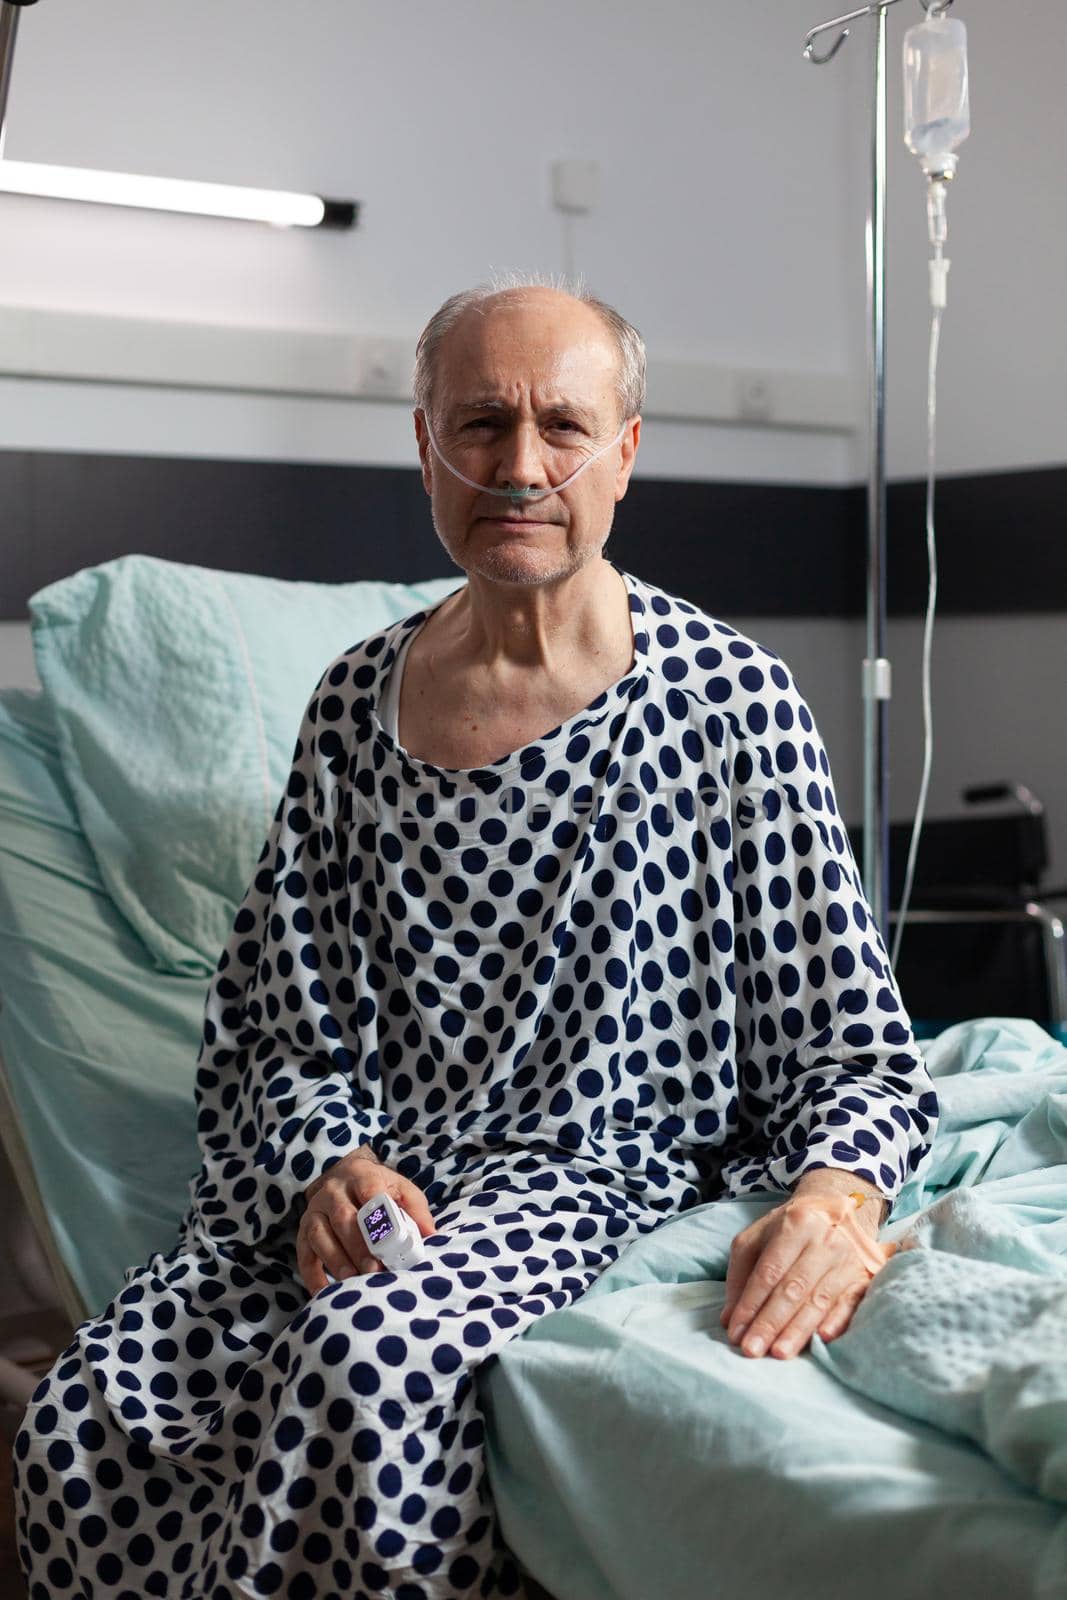 Portrait of sad, unwell senior man sitting on the edge of hospital bed with iv drip attached and breathing with help from oxygen mask, looking at camera.